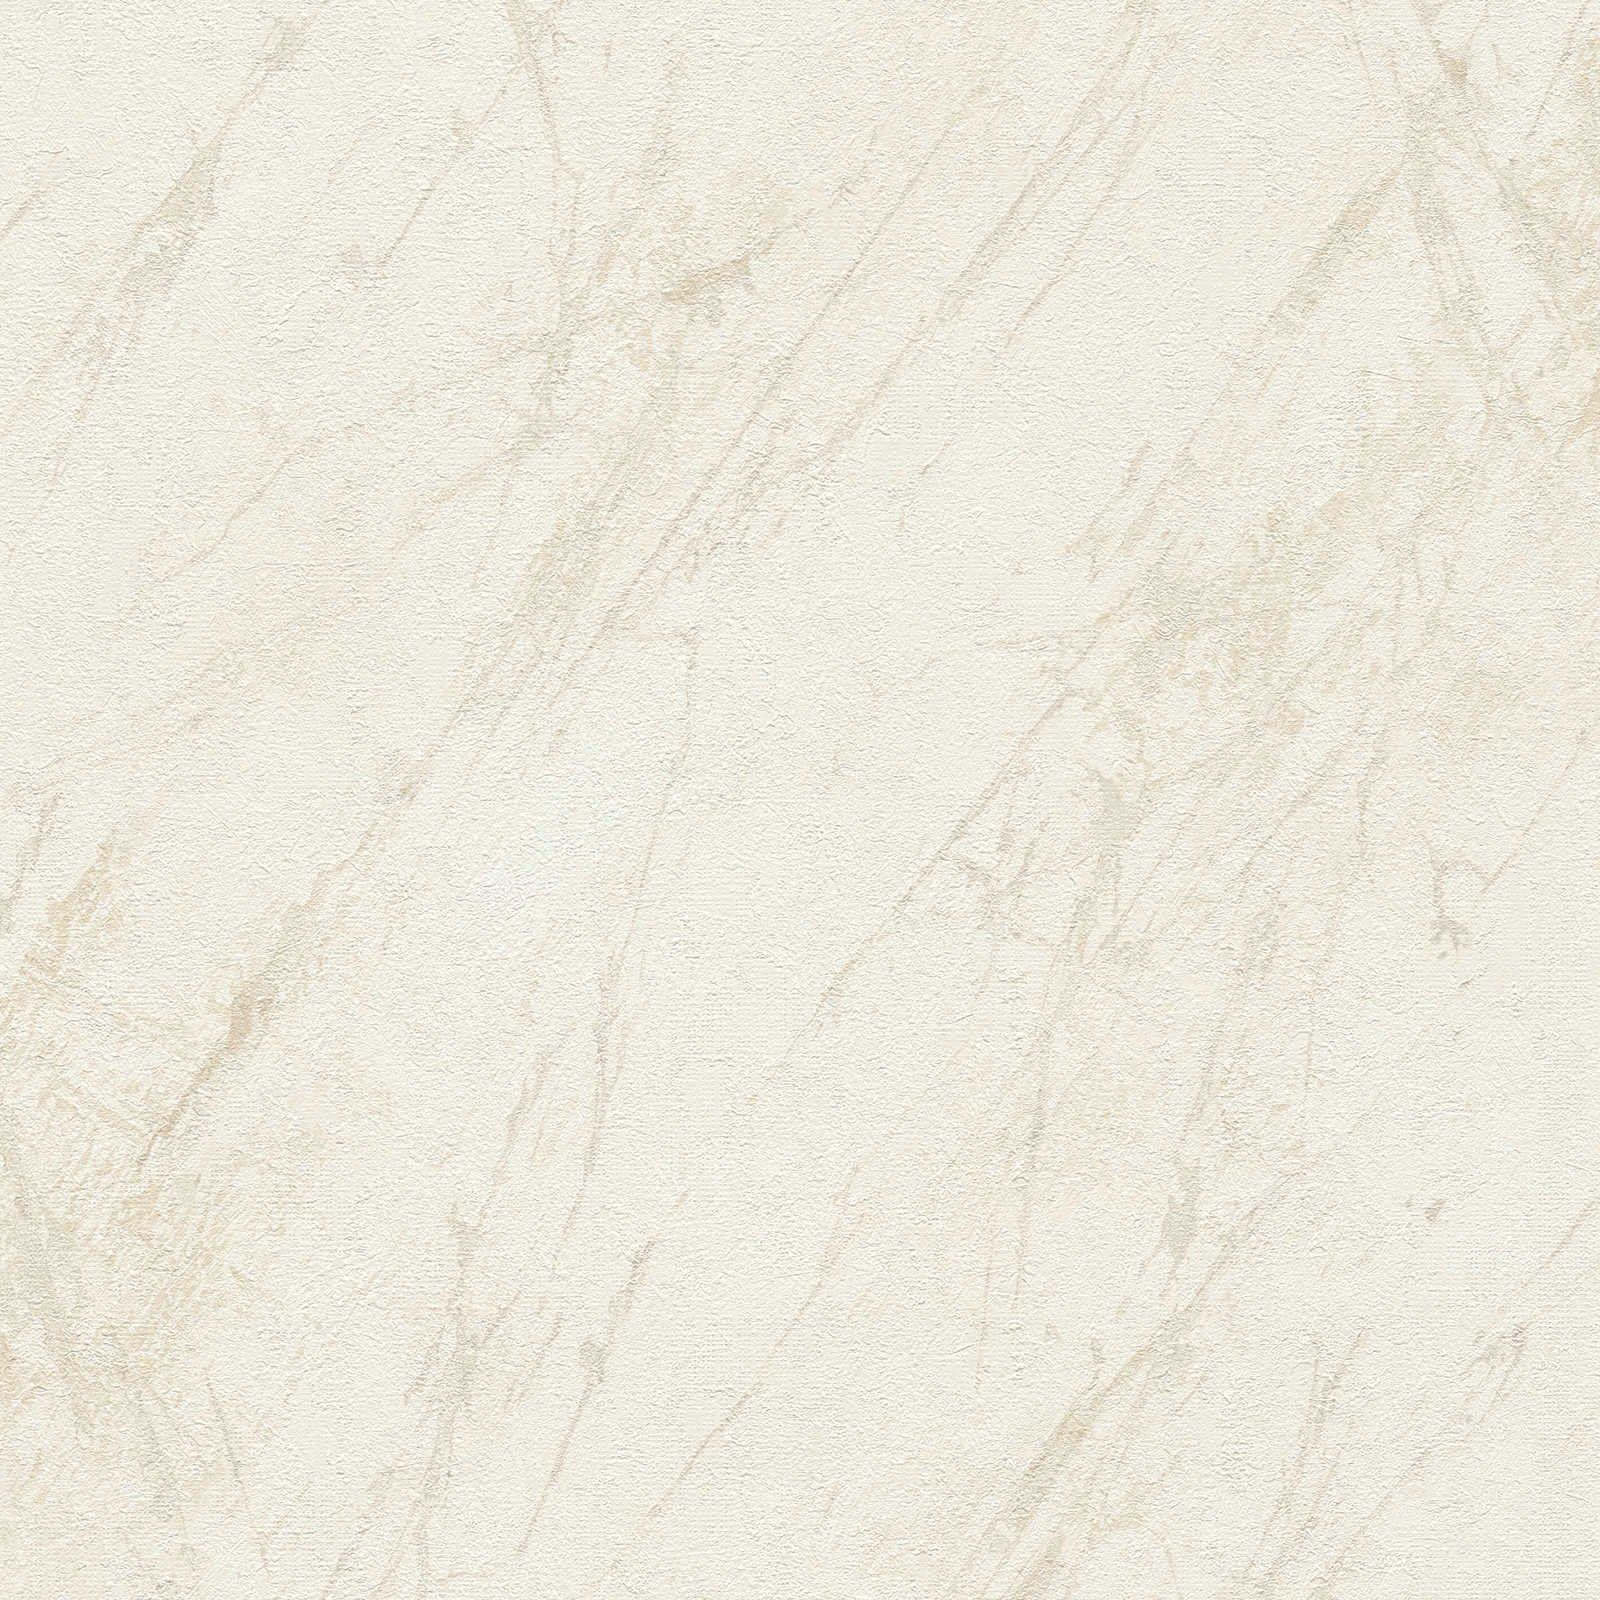 The Bos - Marble industrial wallpaper AS Creation Roll Cream  388171